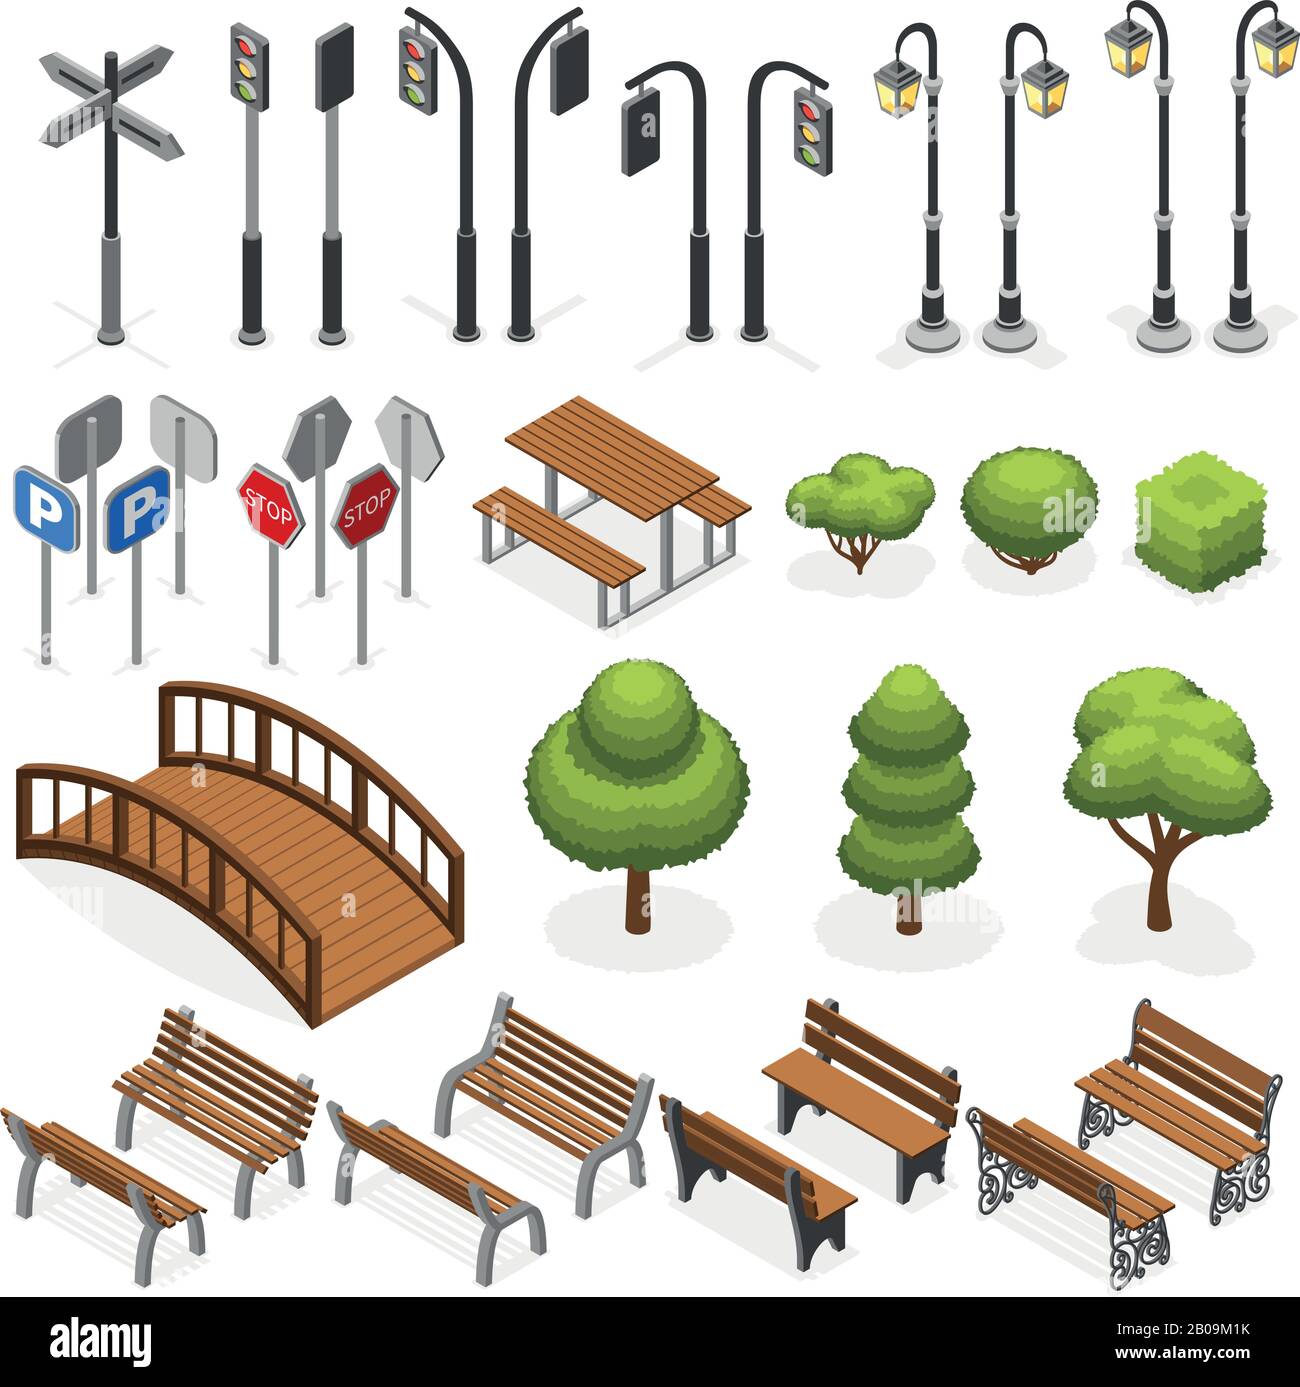 Urban city street miniature isometric vector objects, benches, trees, streetlight, seats, road signs. Urban object bench and tree, elements for urban design illustration Stock Vector